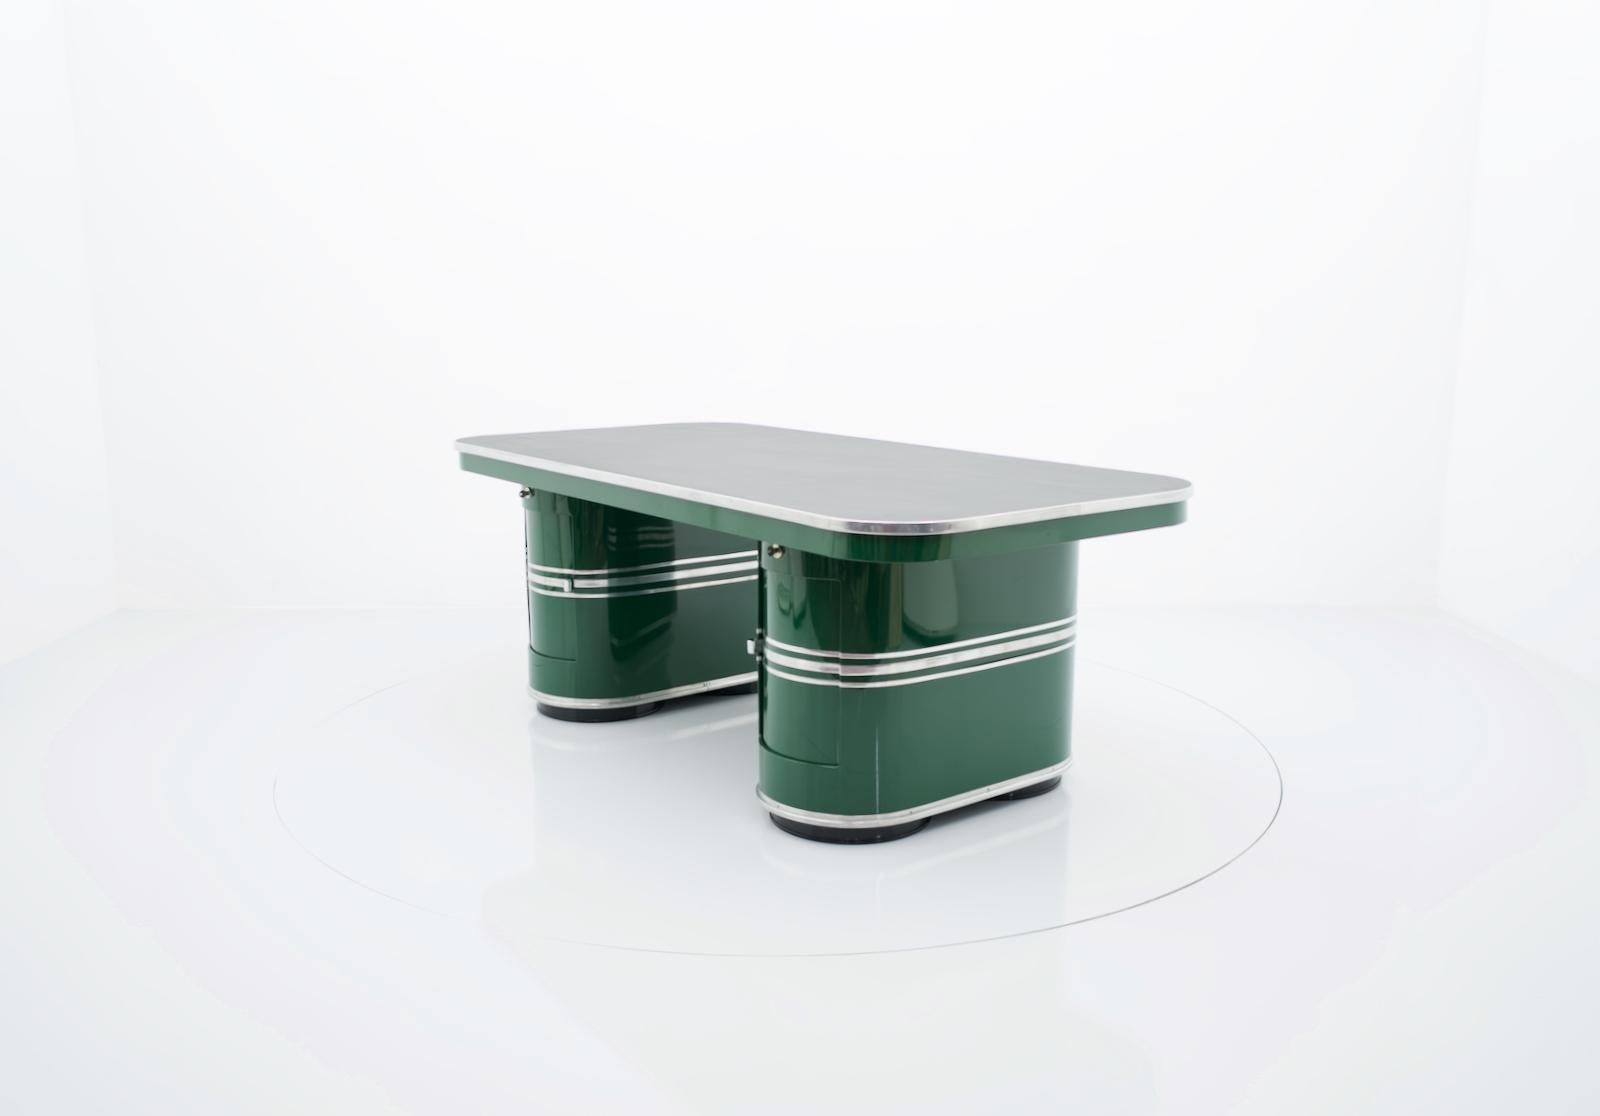 Mauser Rundform 'Berlin' Writing Desk in British Racing Green, Germany, 1950 For Sale 6